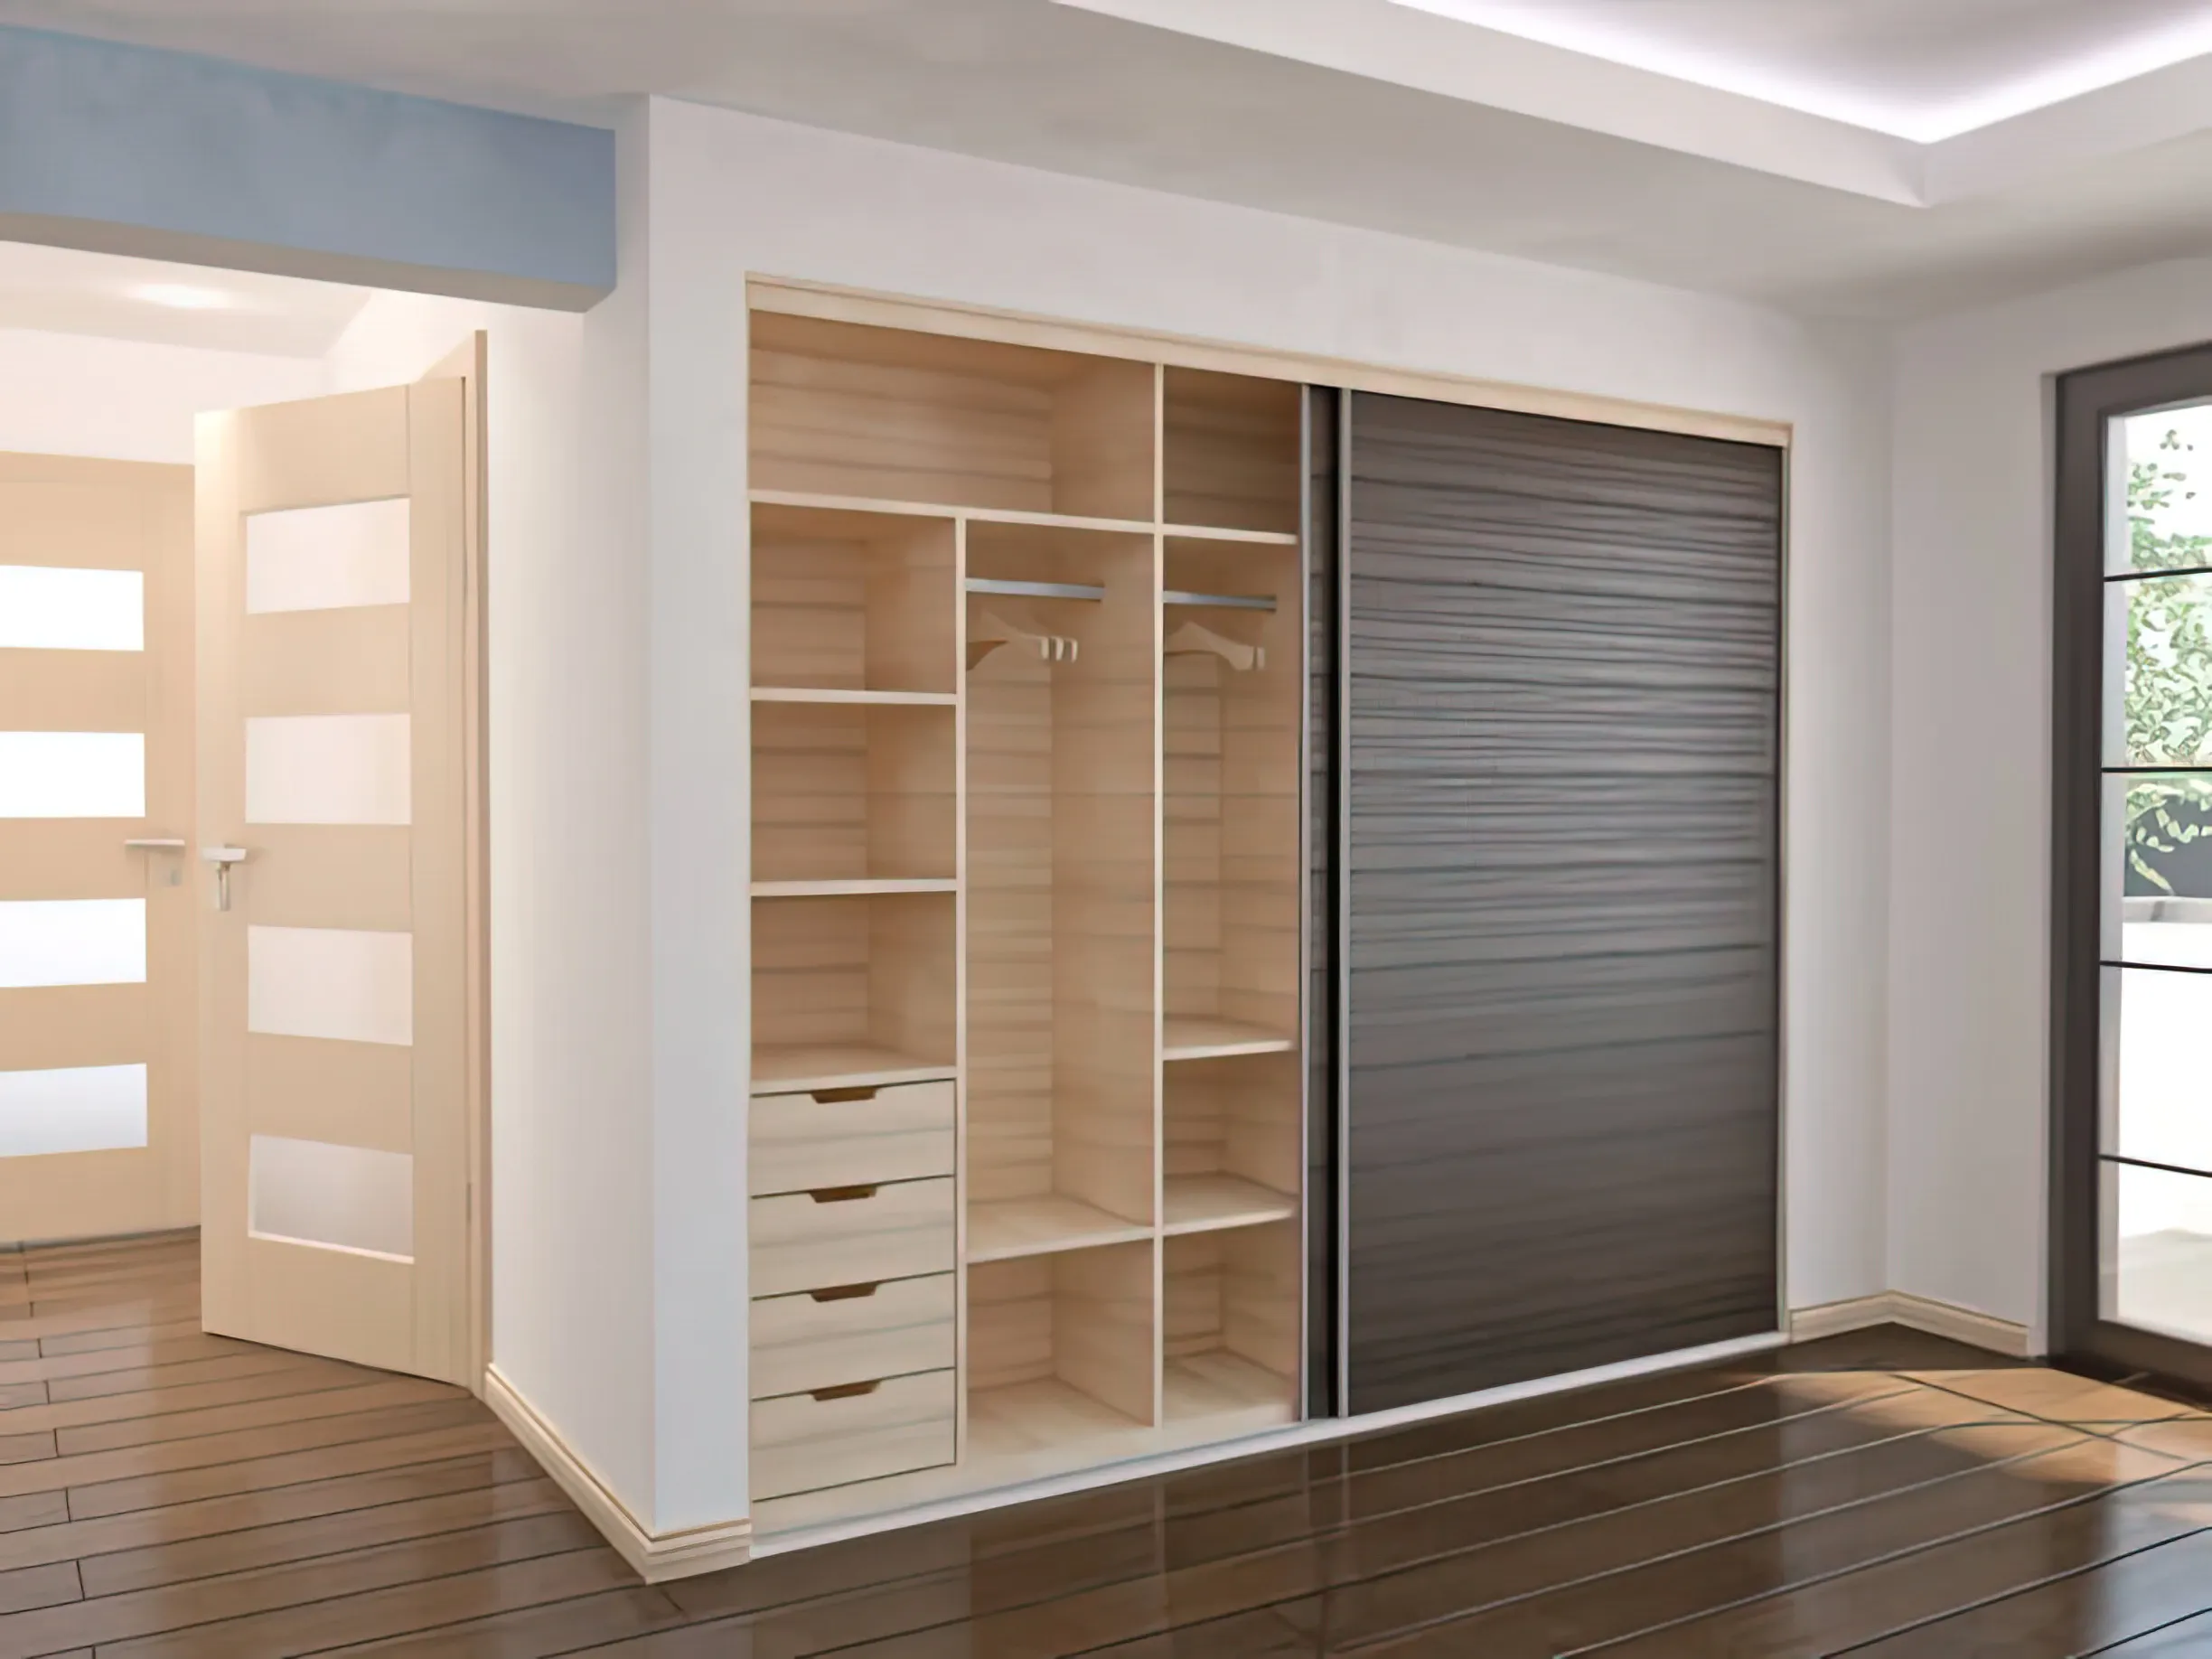 In the short, Thermofoil cabinets are made from MDF board covered with a vinyl film.